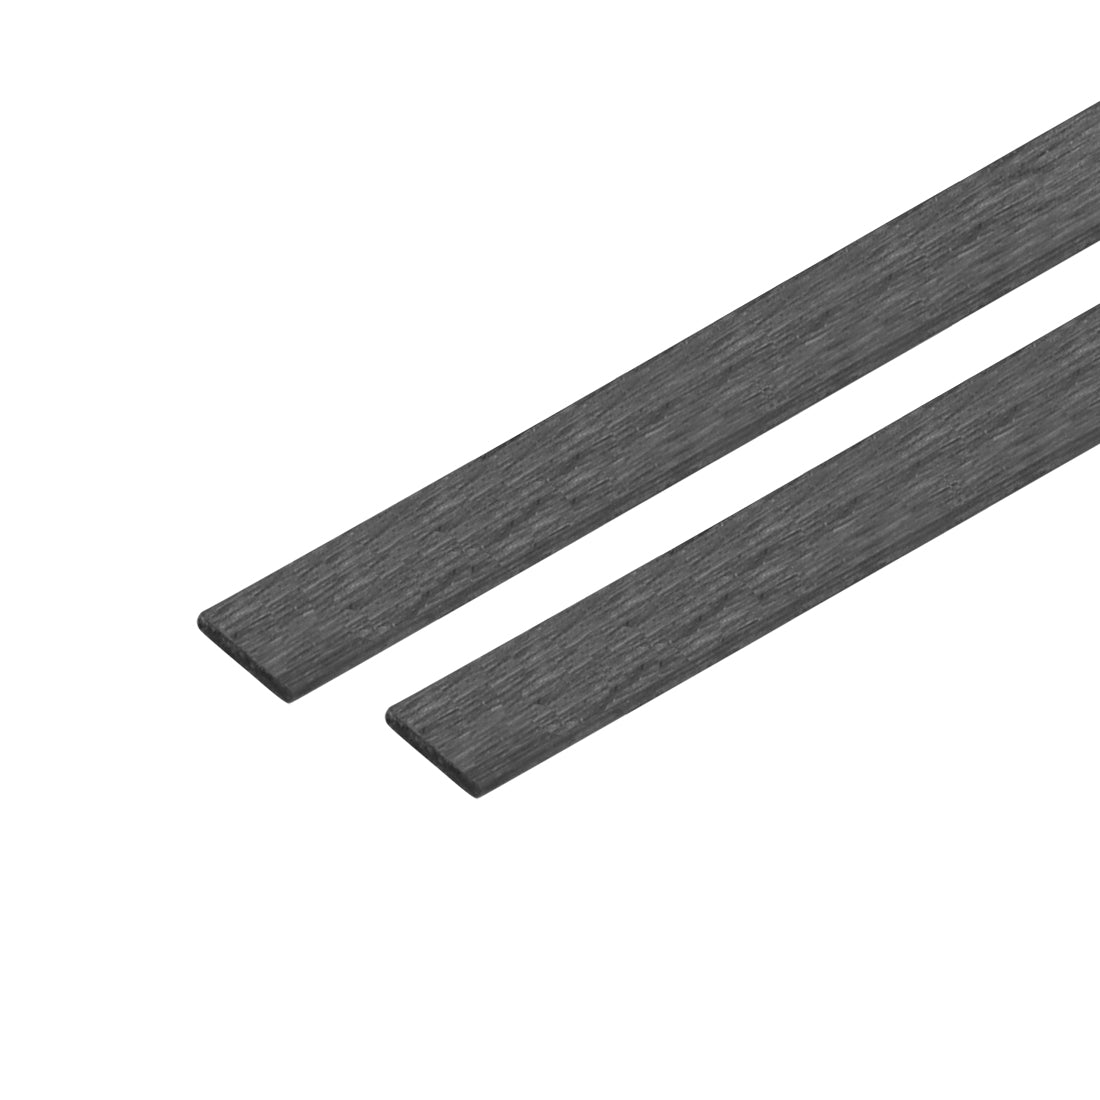 uxcell Uxcell Carbon Fiber Strip Bars 0.5x3mm 600mm Length Pultruded Carbon Fiber Strips for Kites, RC Airplane 2 Pcs